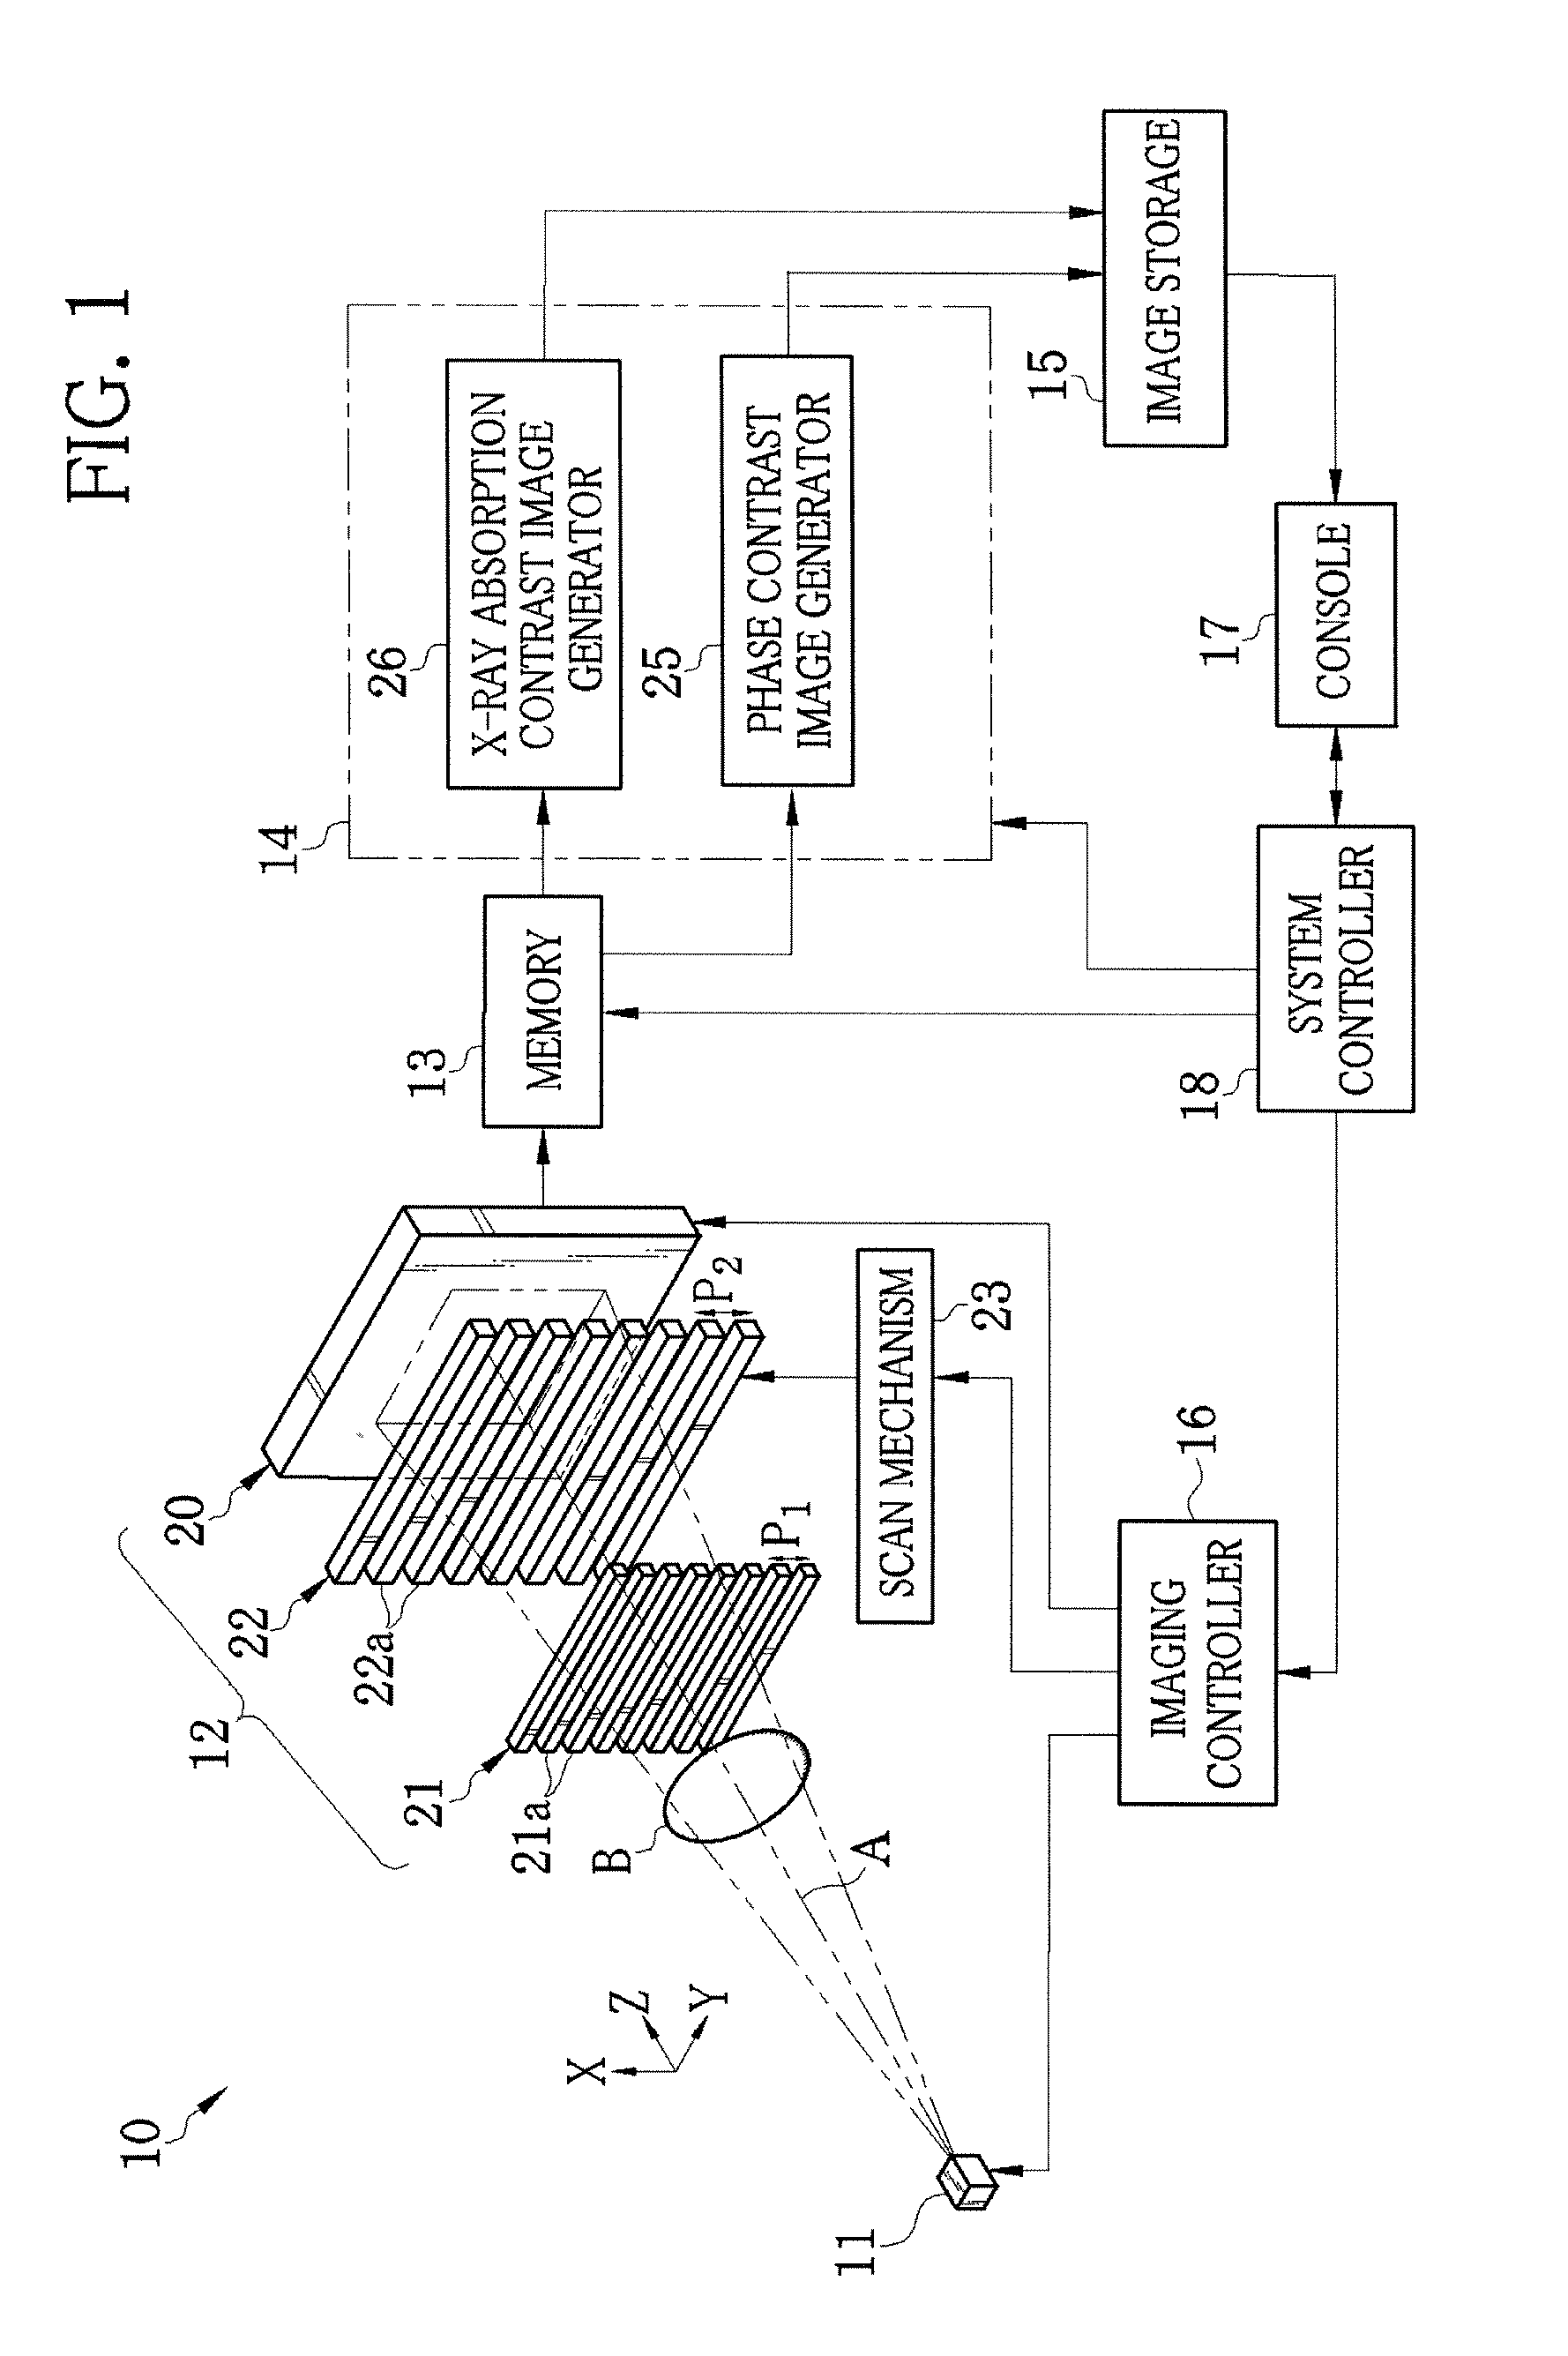 Radiation imaging system and method